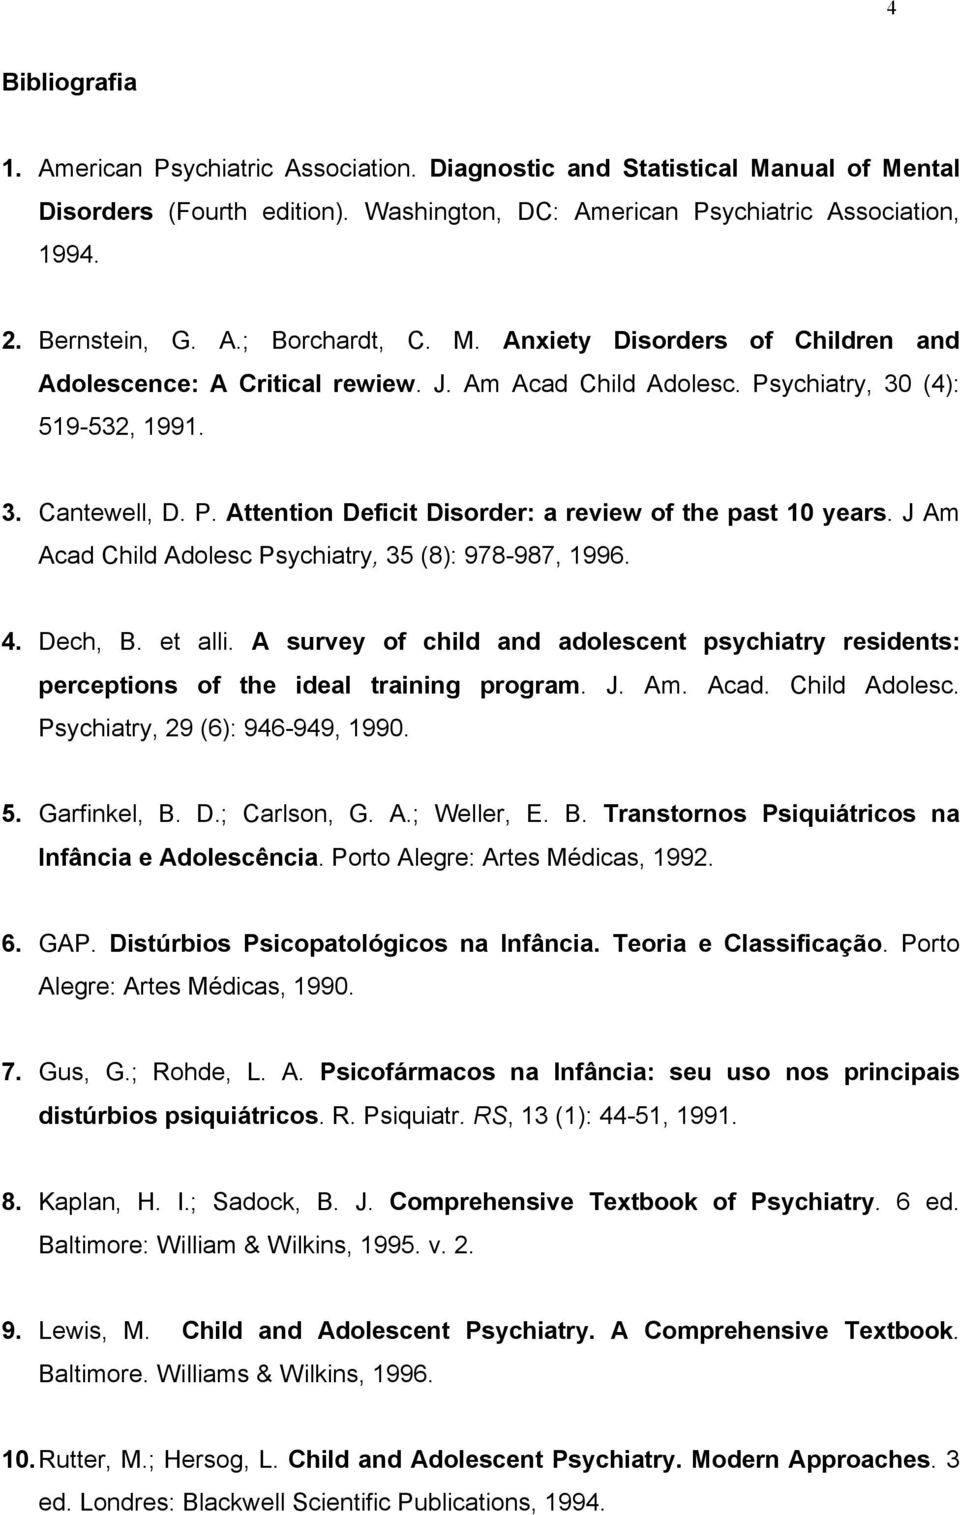 J Am Acad Child Adolesc Psychiatry, 35 (8): 978-987, 1996. 4. Dech, B. et alli. A survey of child and adolescent psychiatry residents: perceptions of the ideal training program. J. Am. Acad. Child Adolesc. Psychiatry, 29 (6): 946-949, 1990.